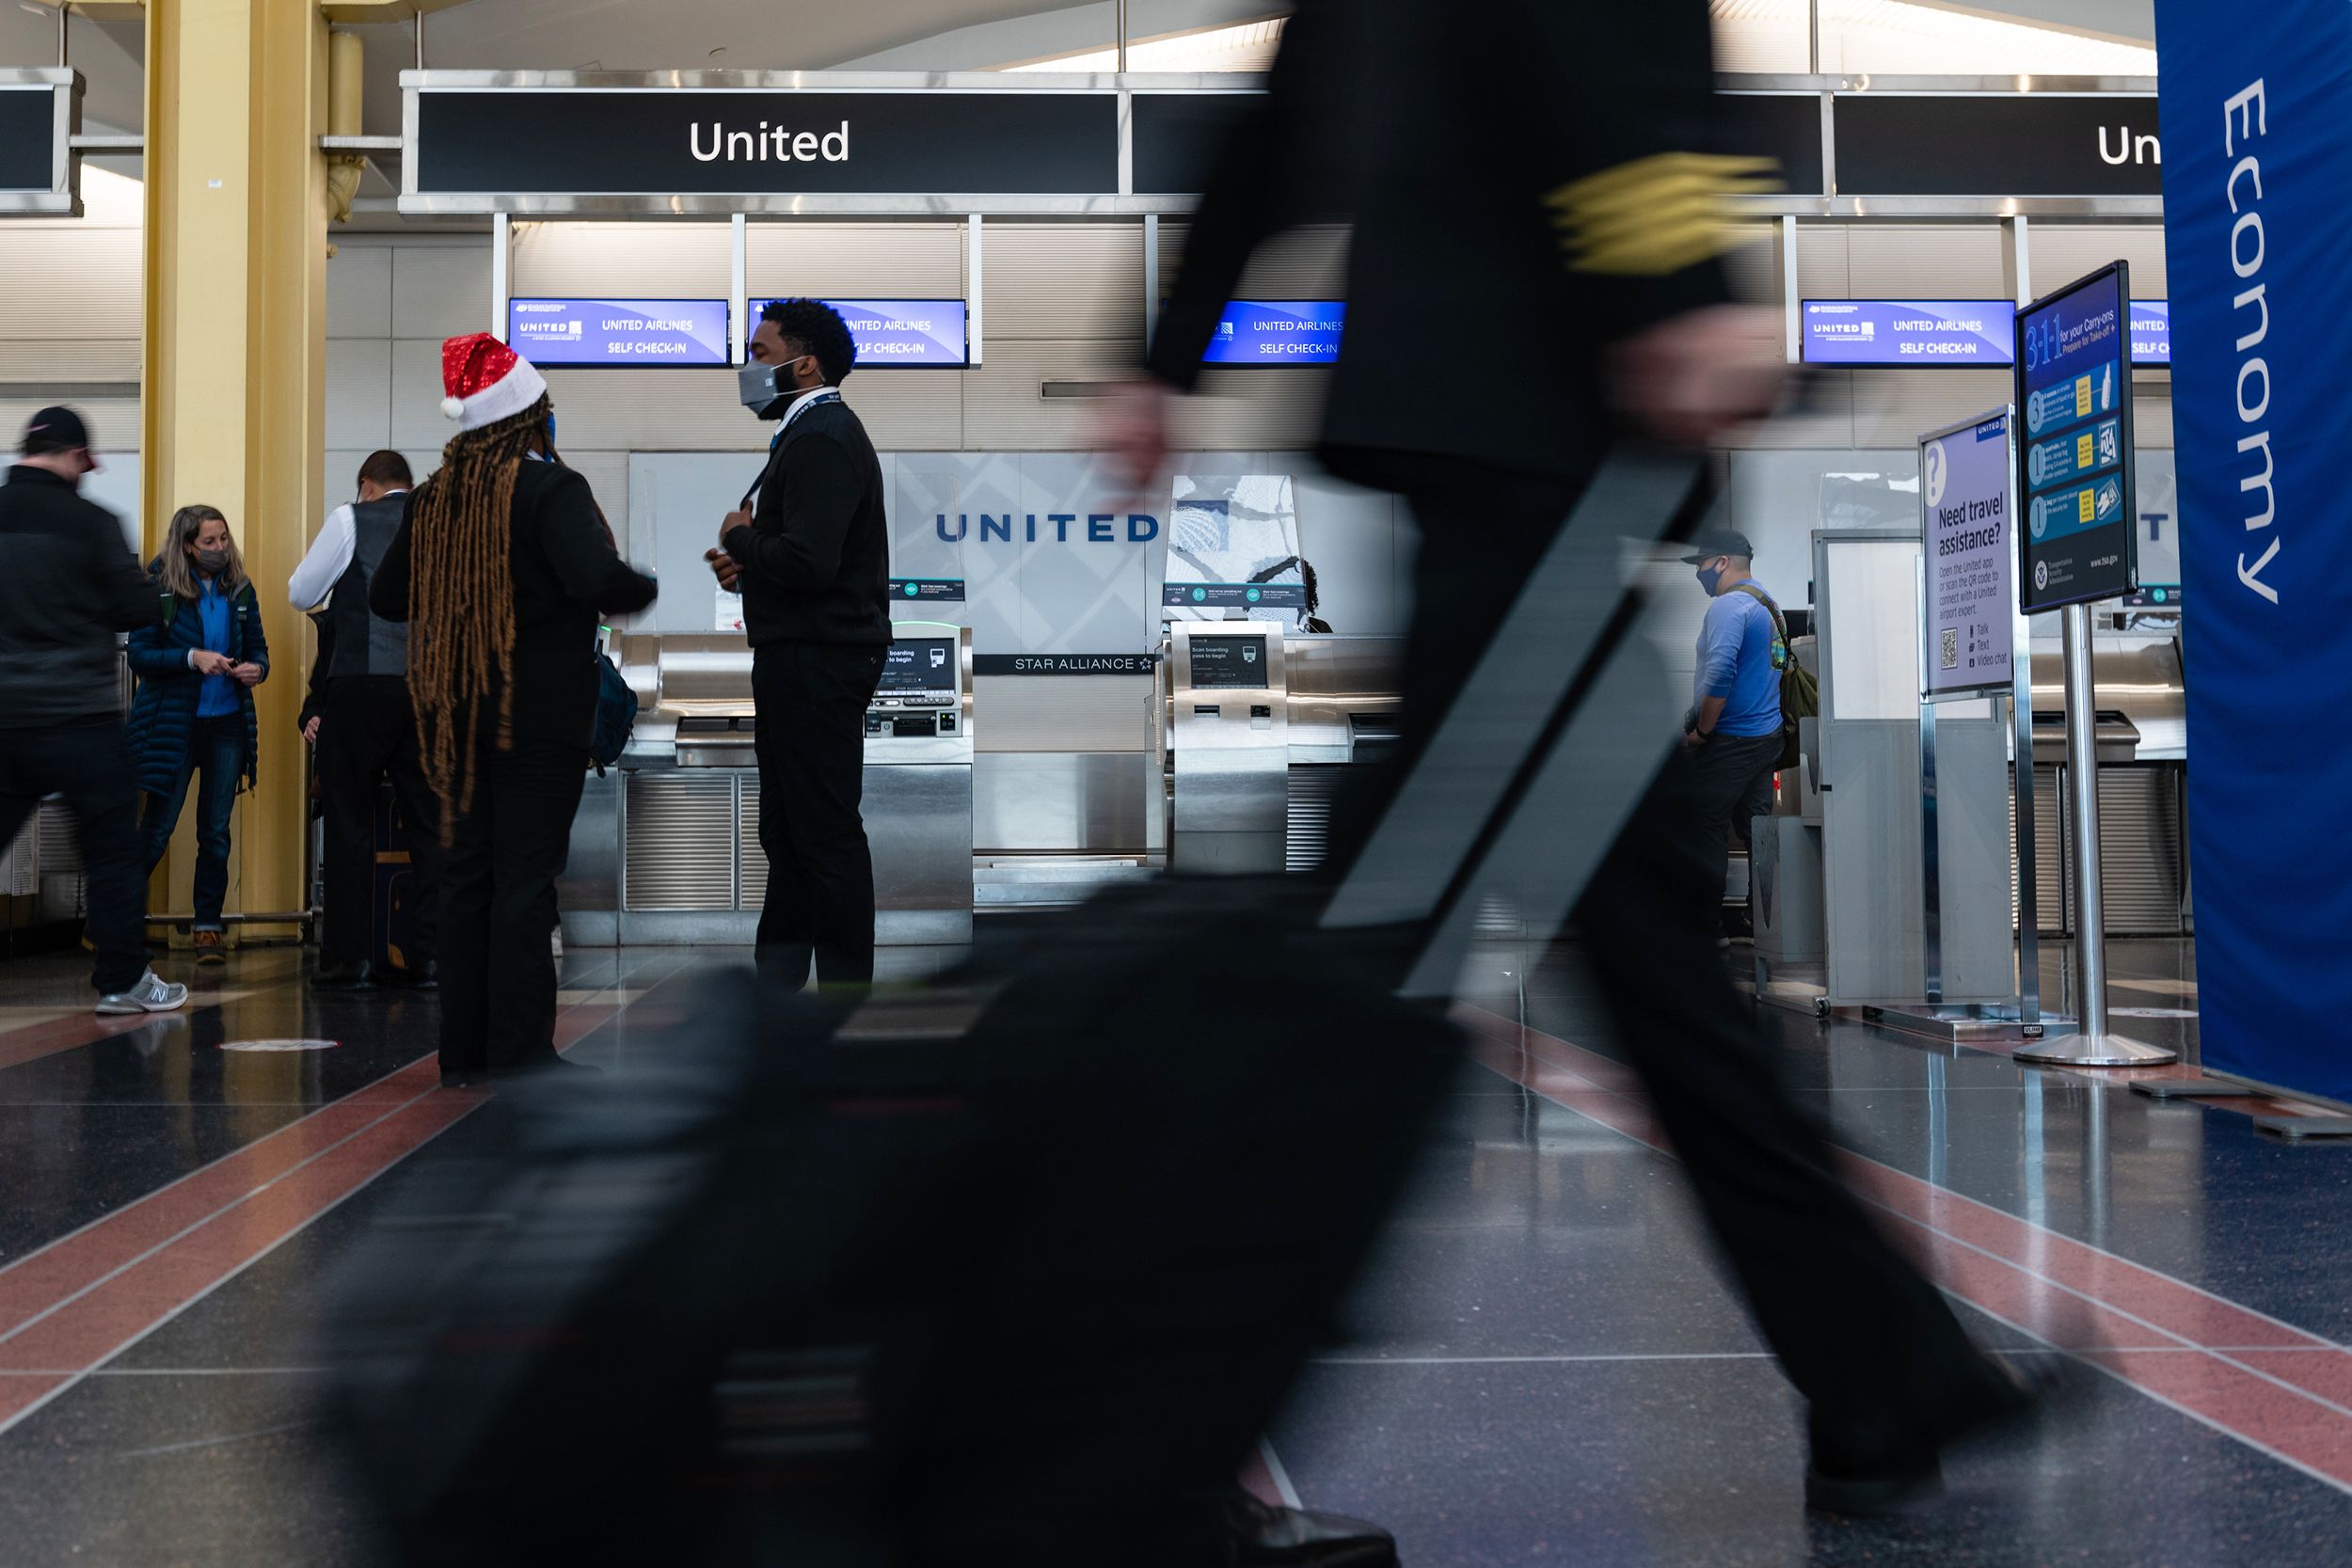 Winter holiday travel: Pounce now on flights or roll the dice?